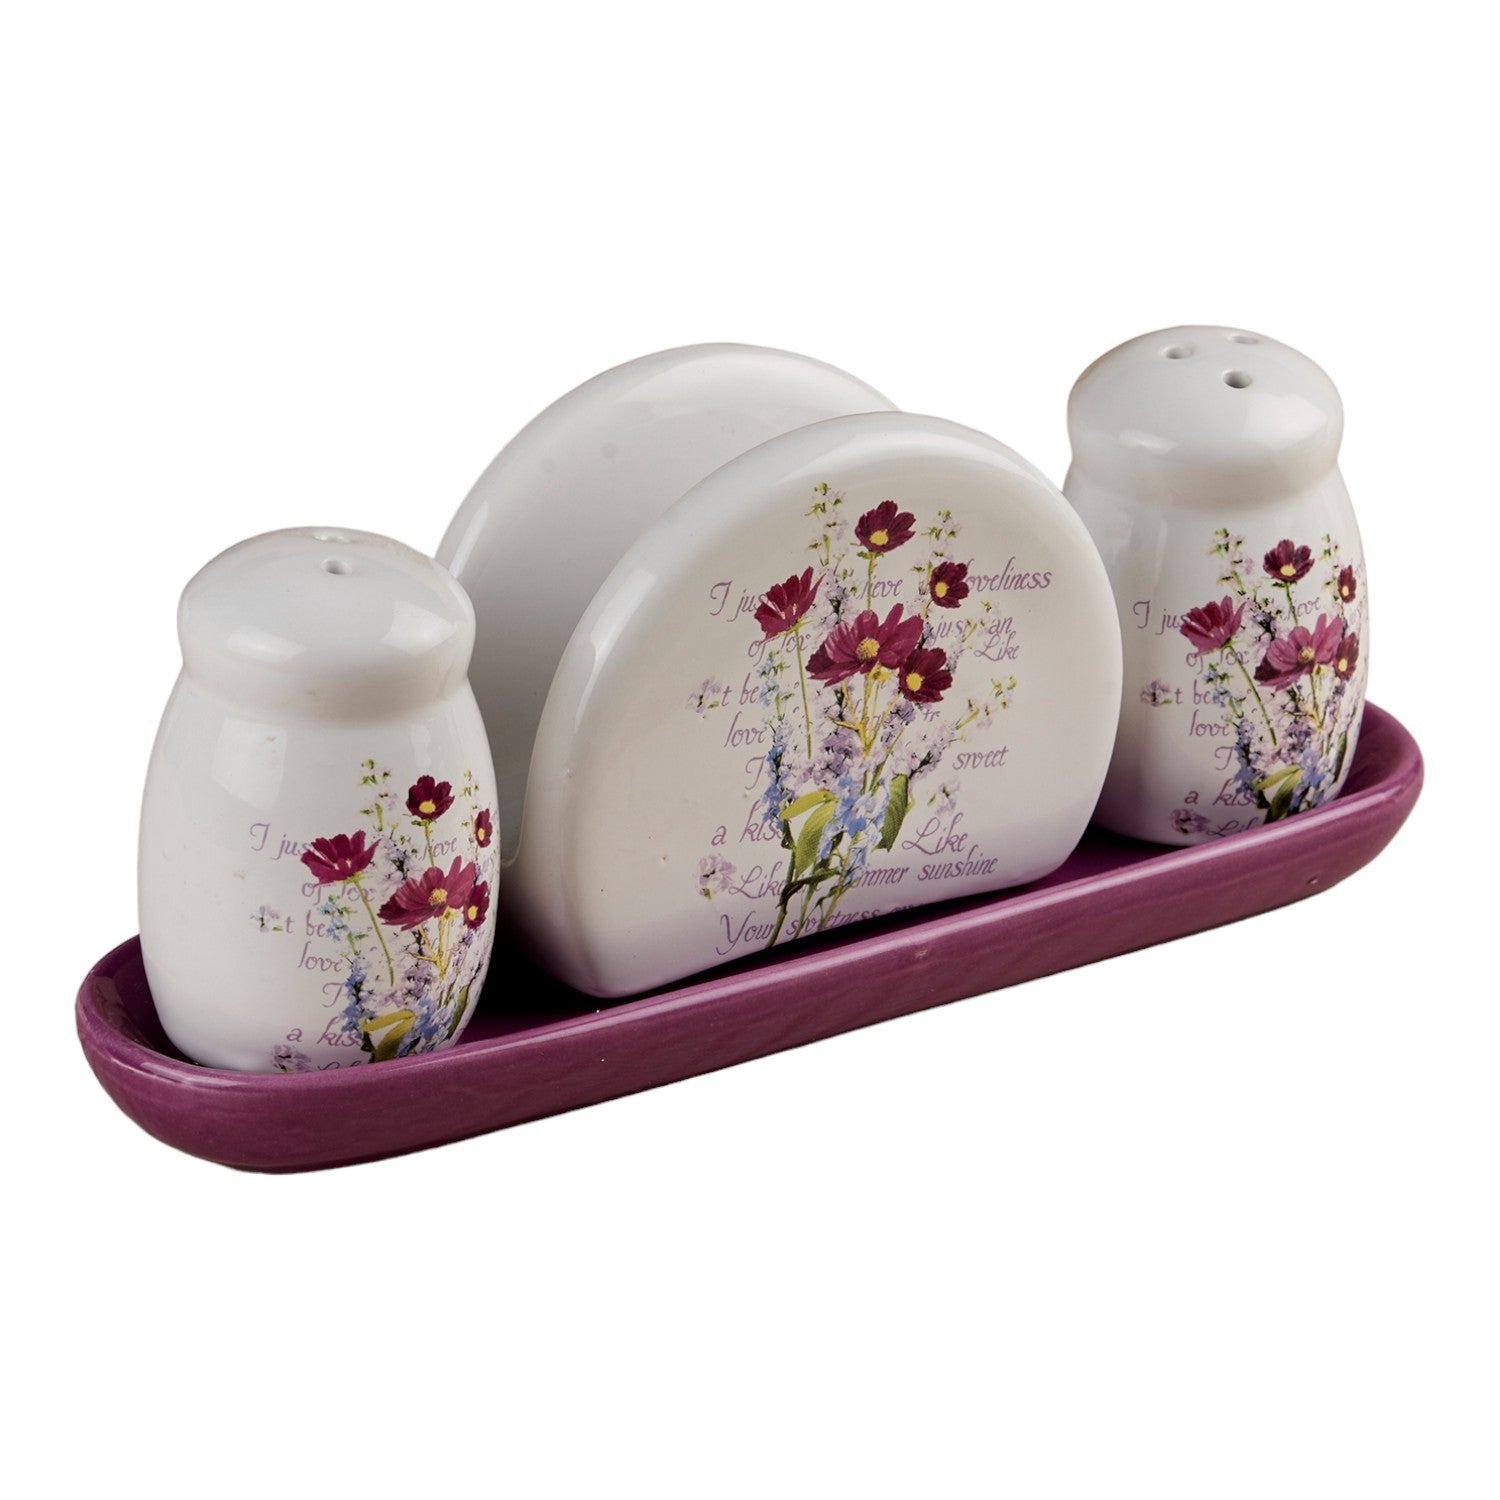 Ceramic Salt and Pepper Shakers Set with tray for Dining Table (10715)